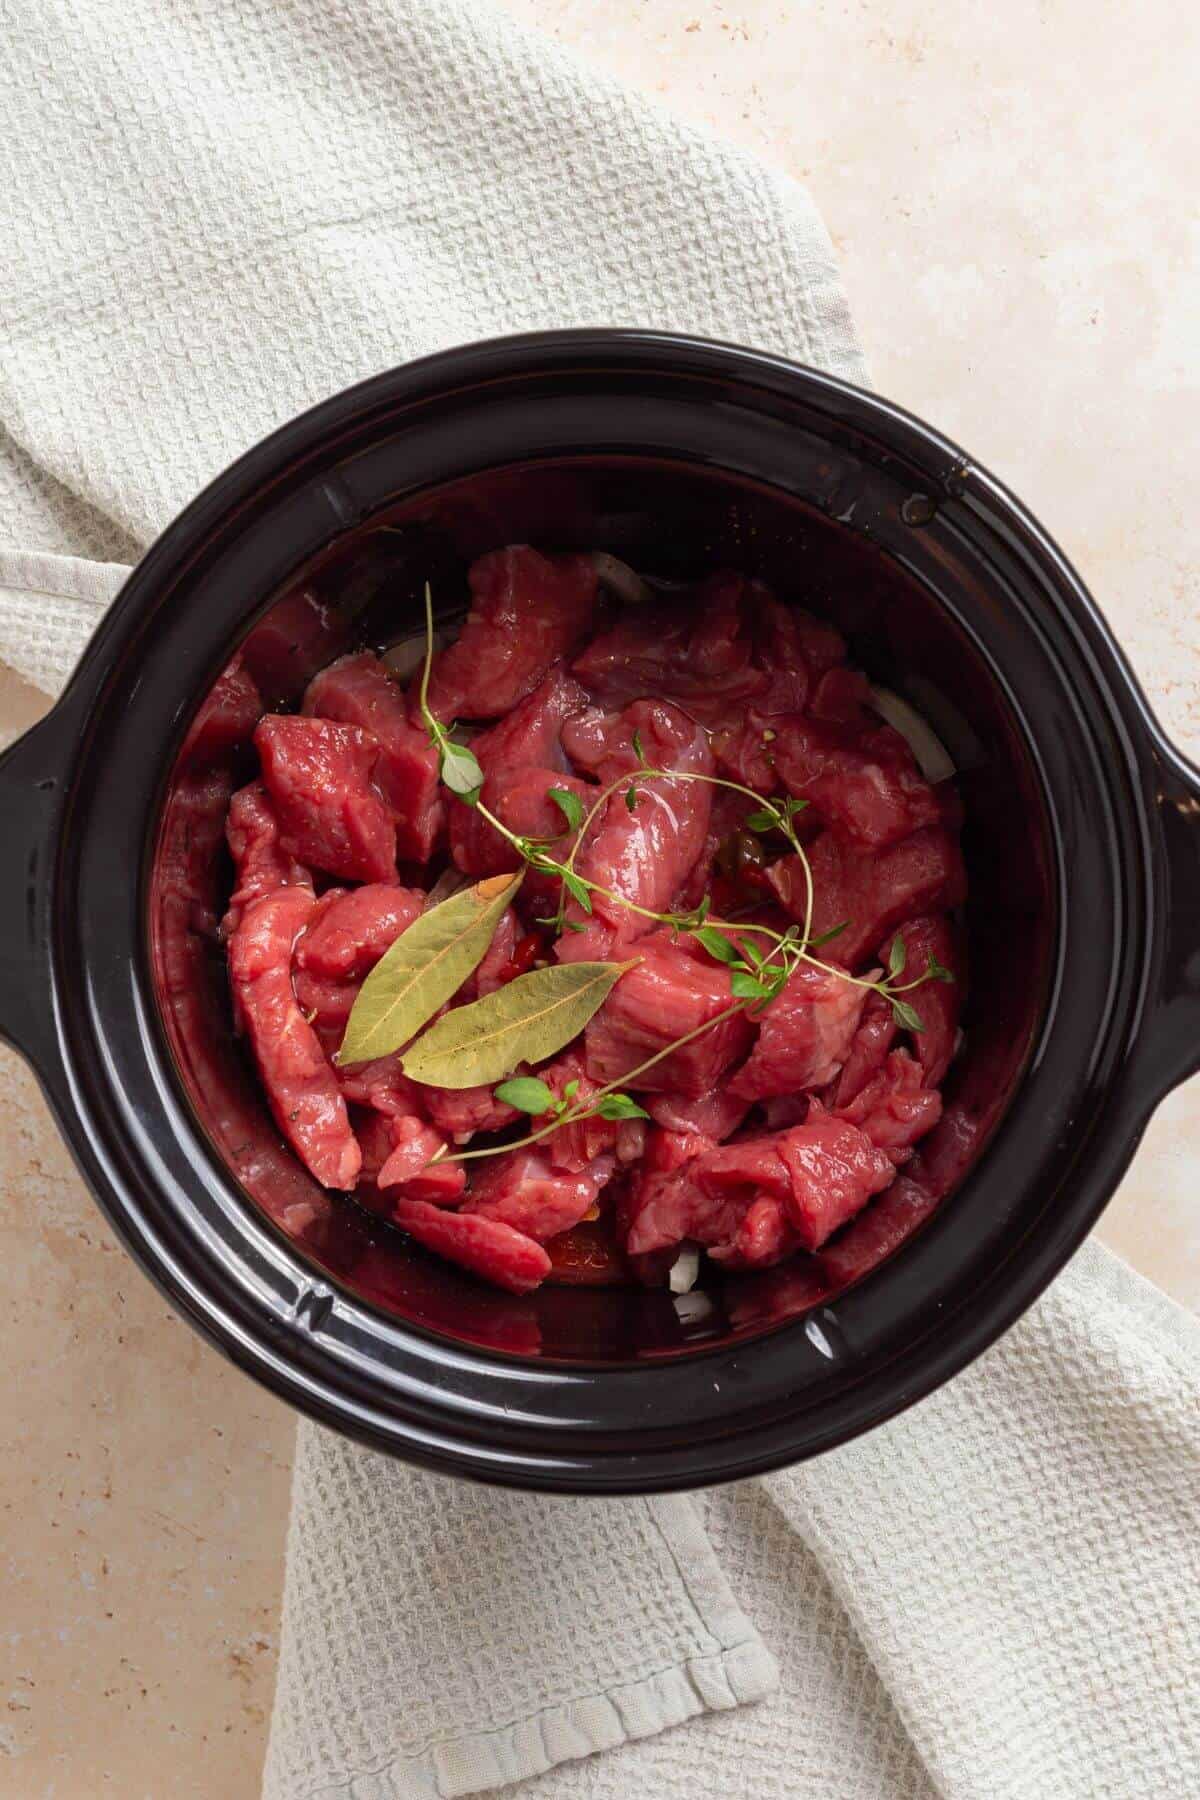 A crock pot filled with cut steak and herbs.